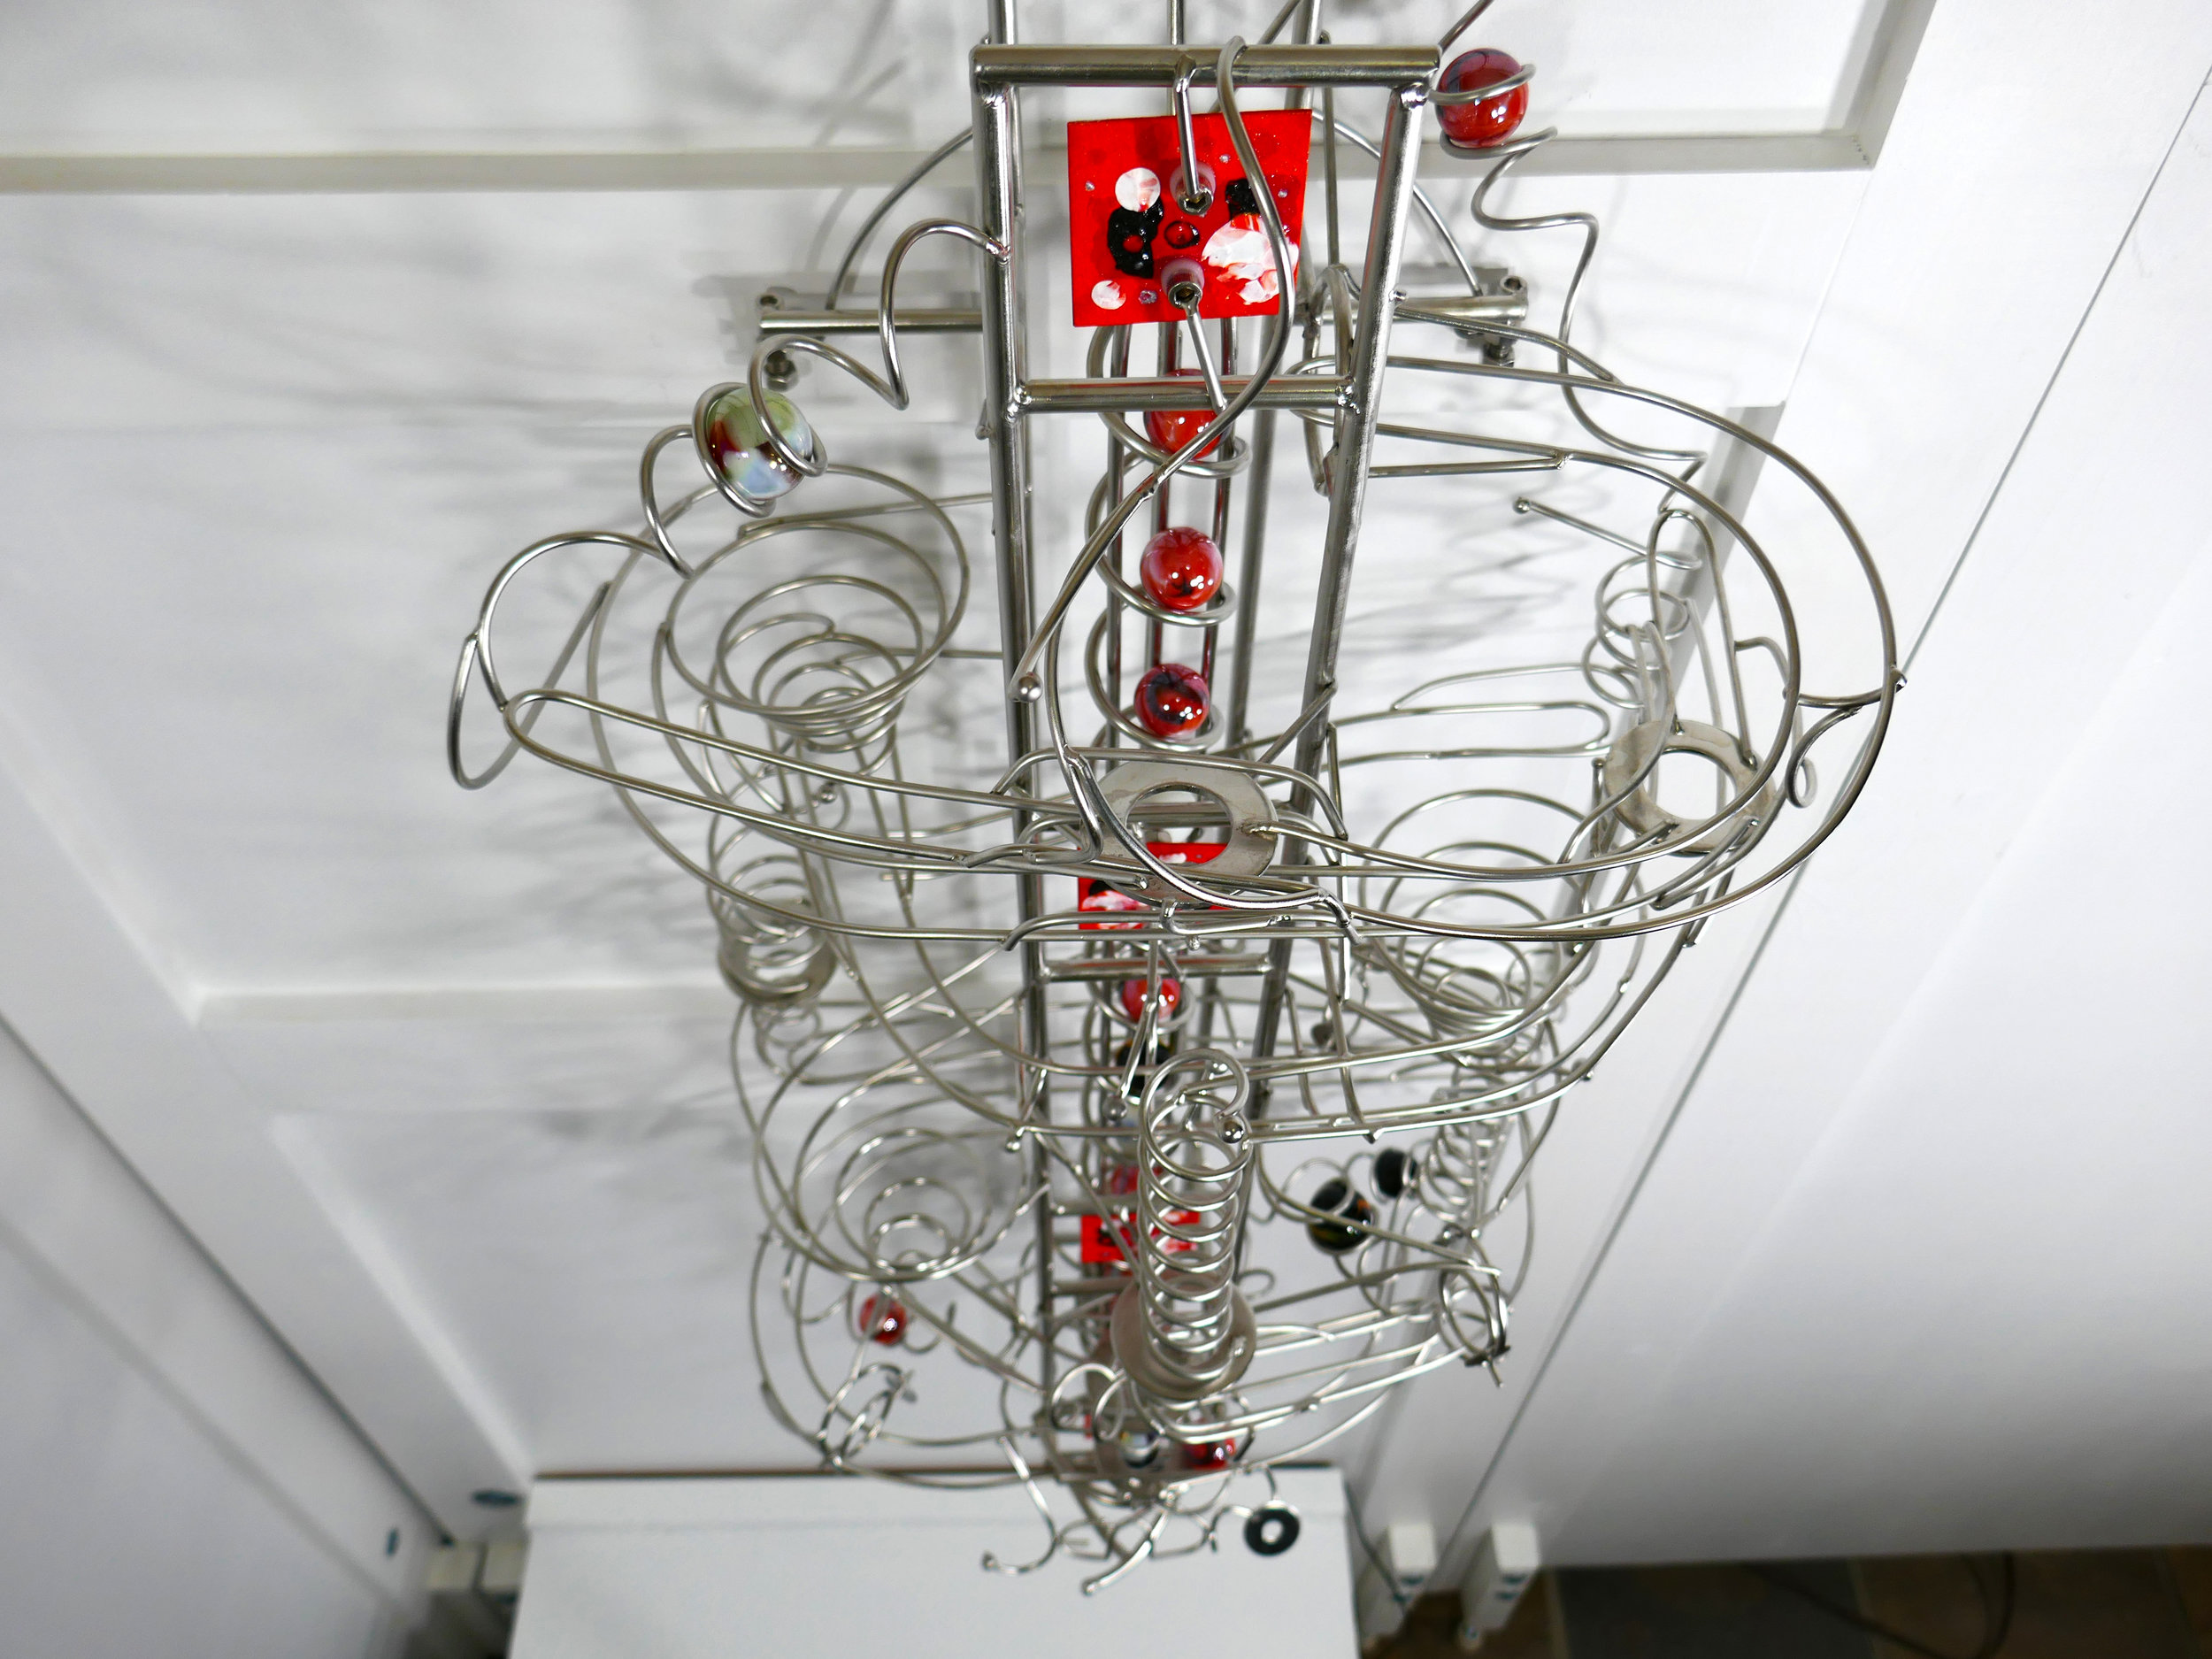 Marble run sculpture - kinetic art front view looking top down - Stephen Jendro 